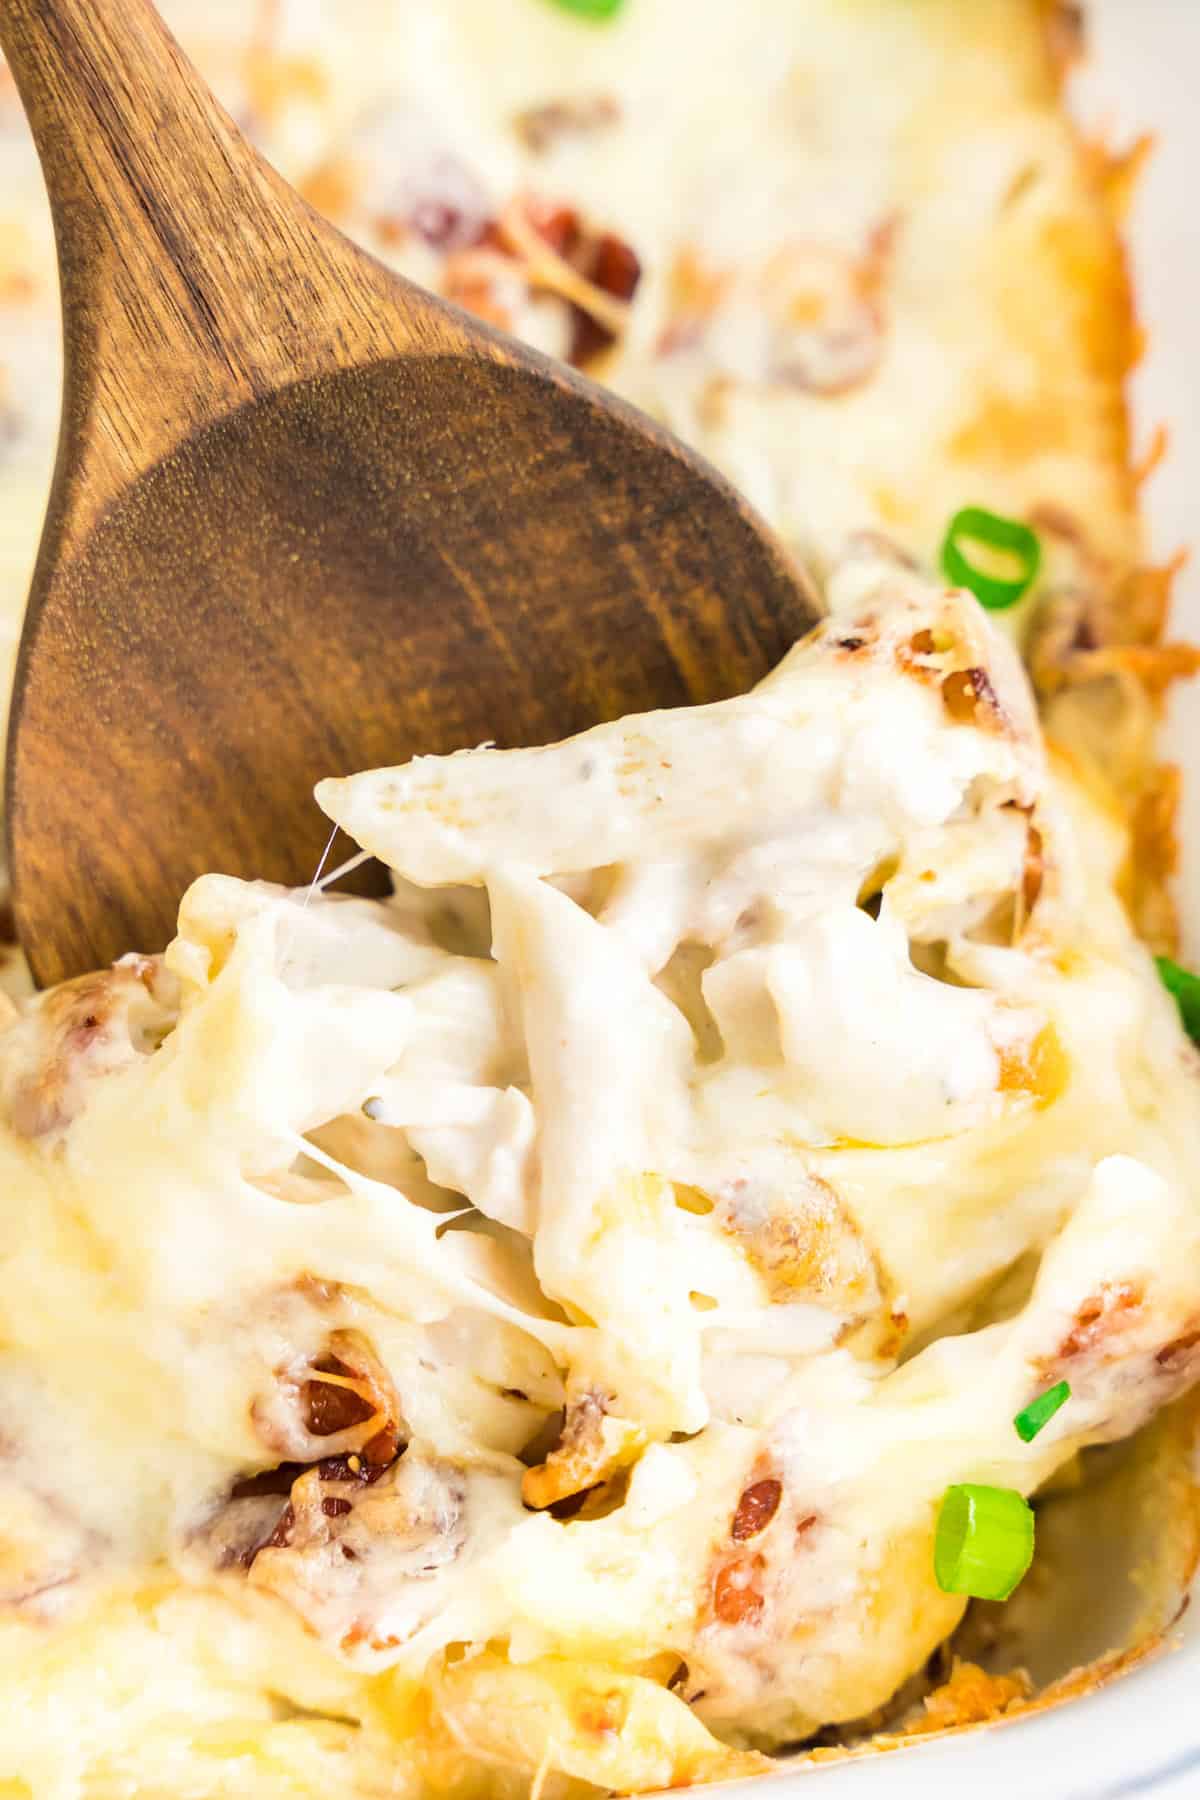 Chicken Bacon Ranch Pasta Bake in Baking Dish with Wooden Spoon Scooping